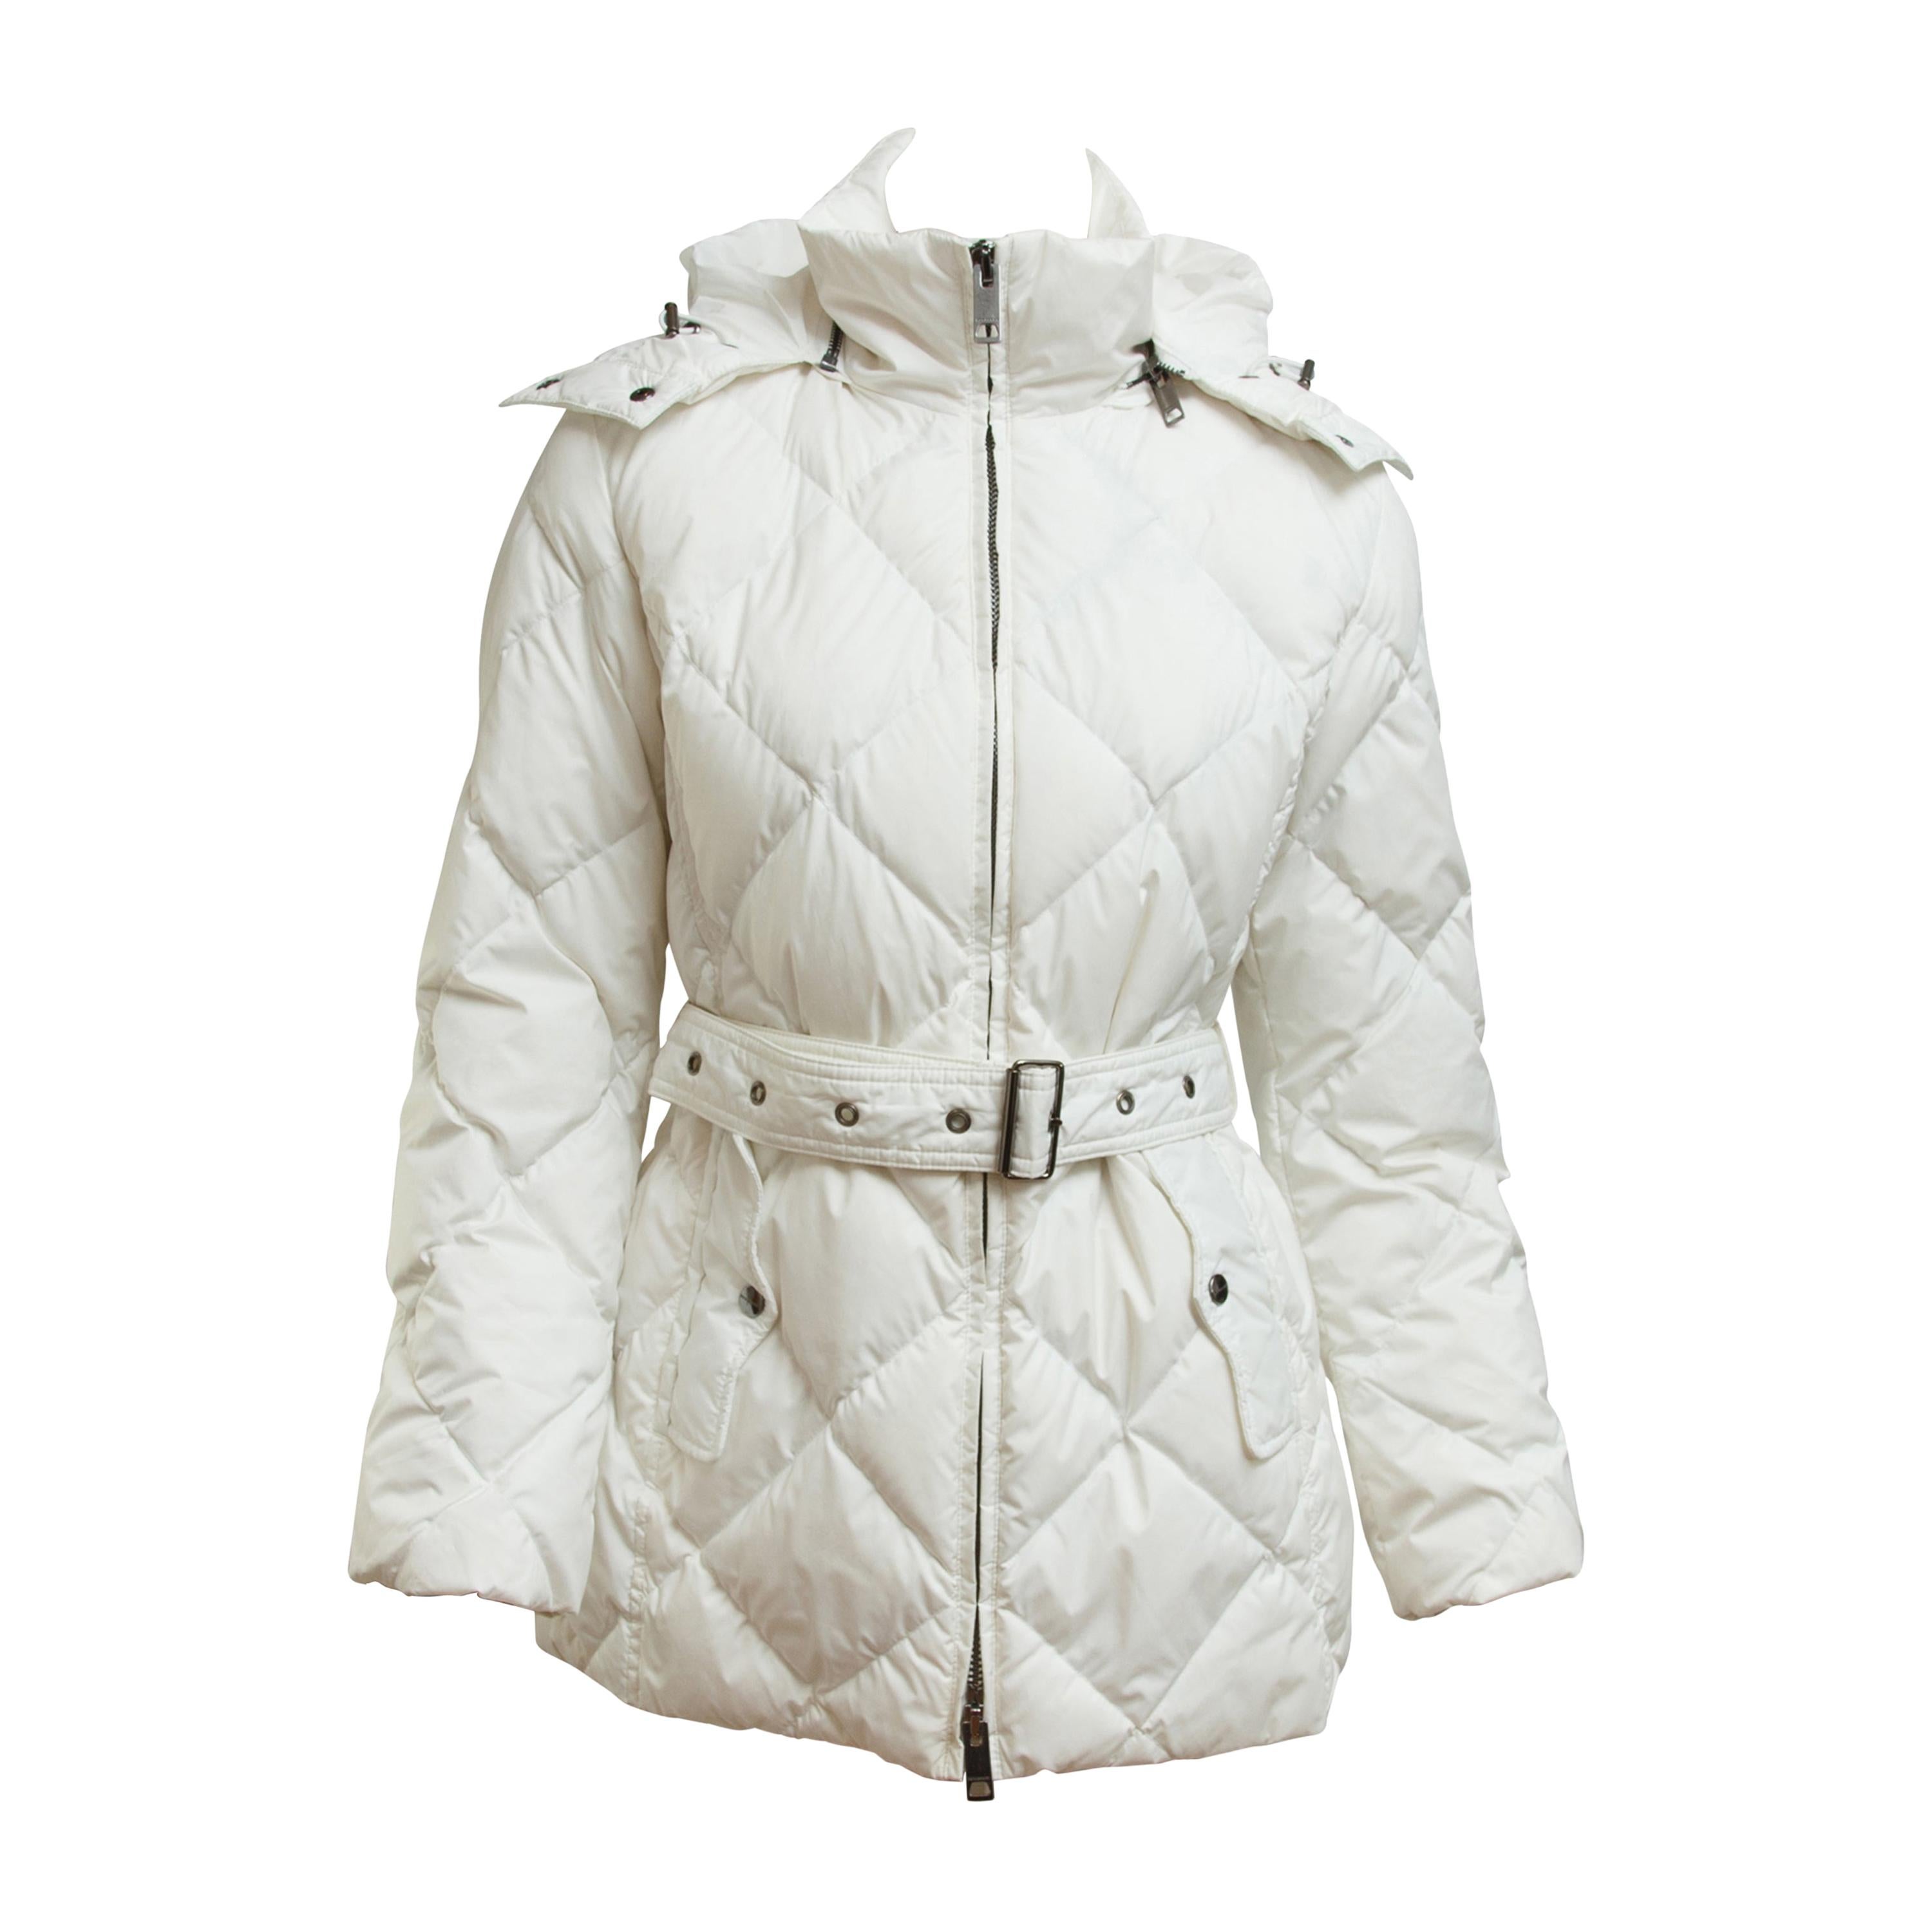 Burberry London White Quilted Puffer Coat